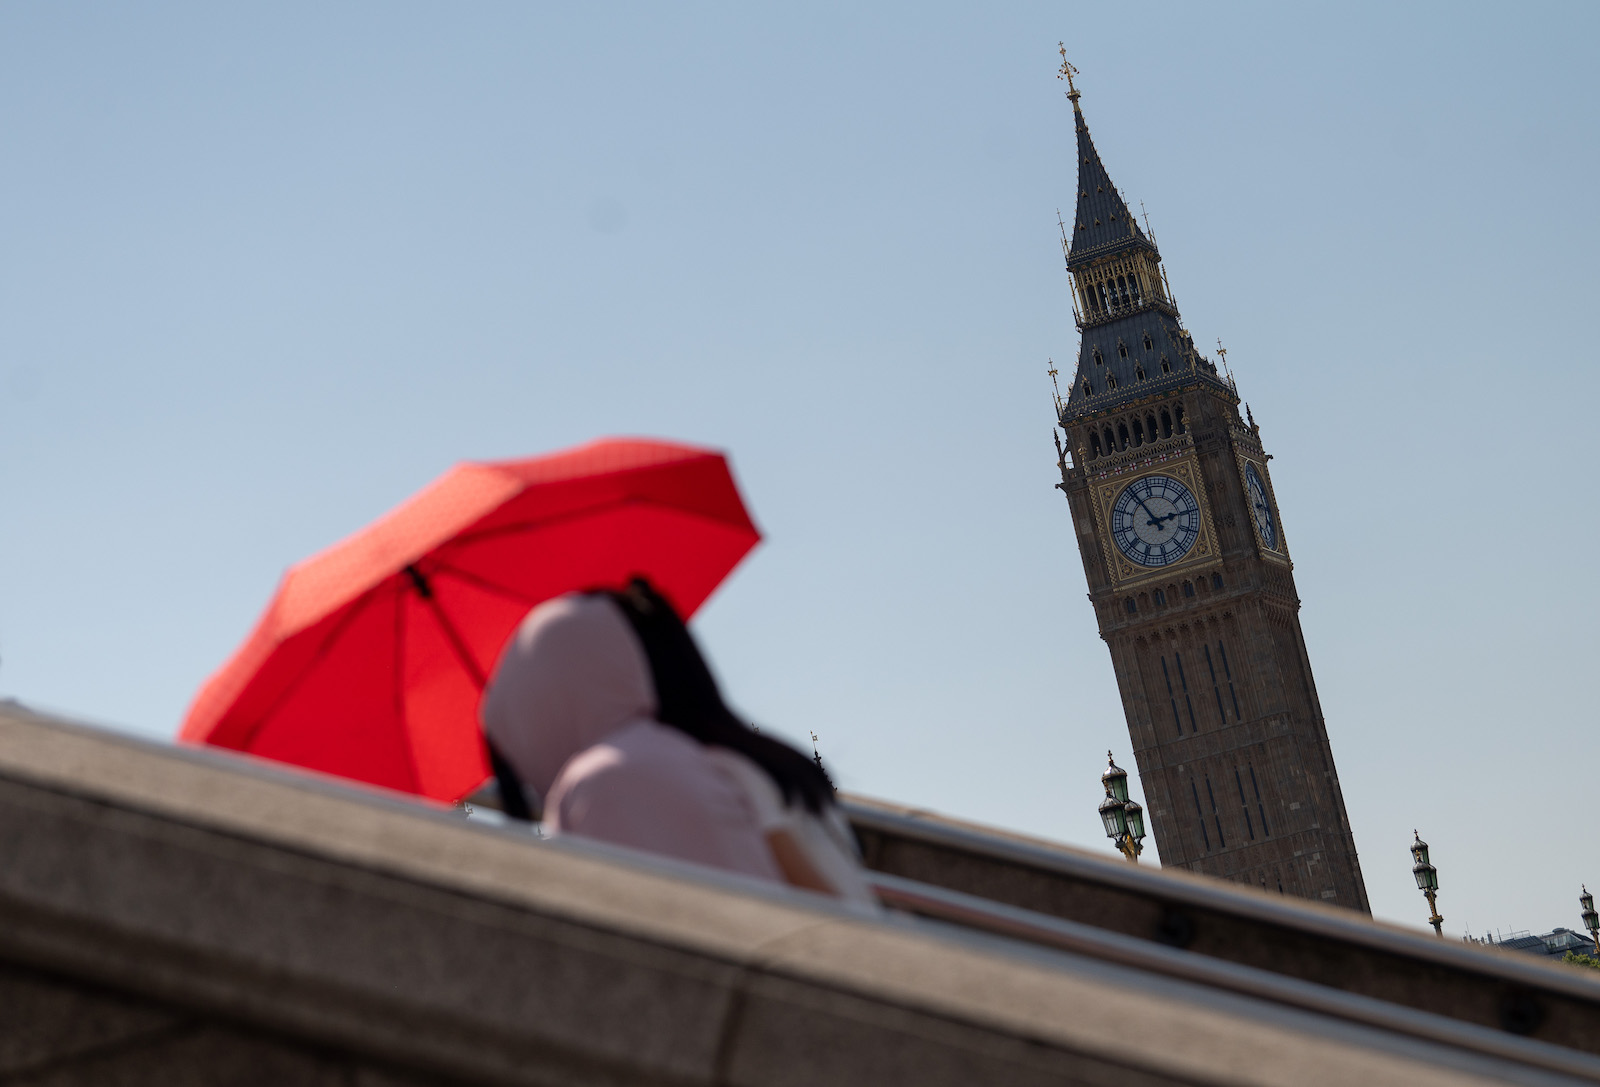 Two women walk along in front of the clock tower Big Ben with an umbrella as a sunshade.